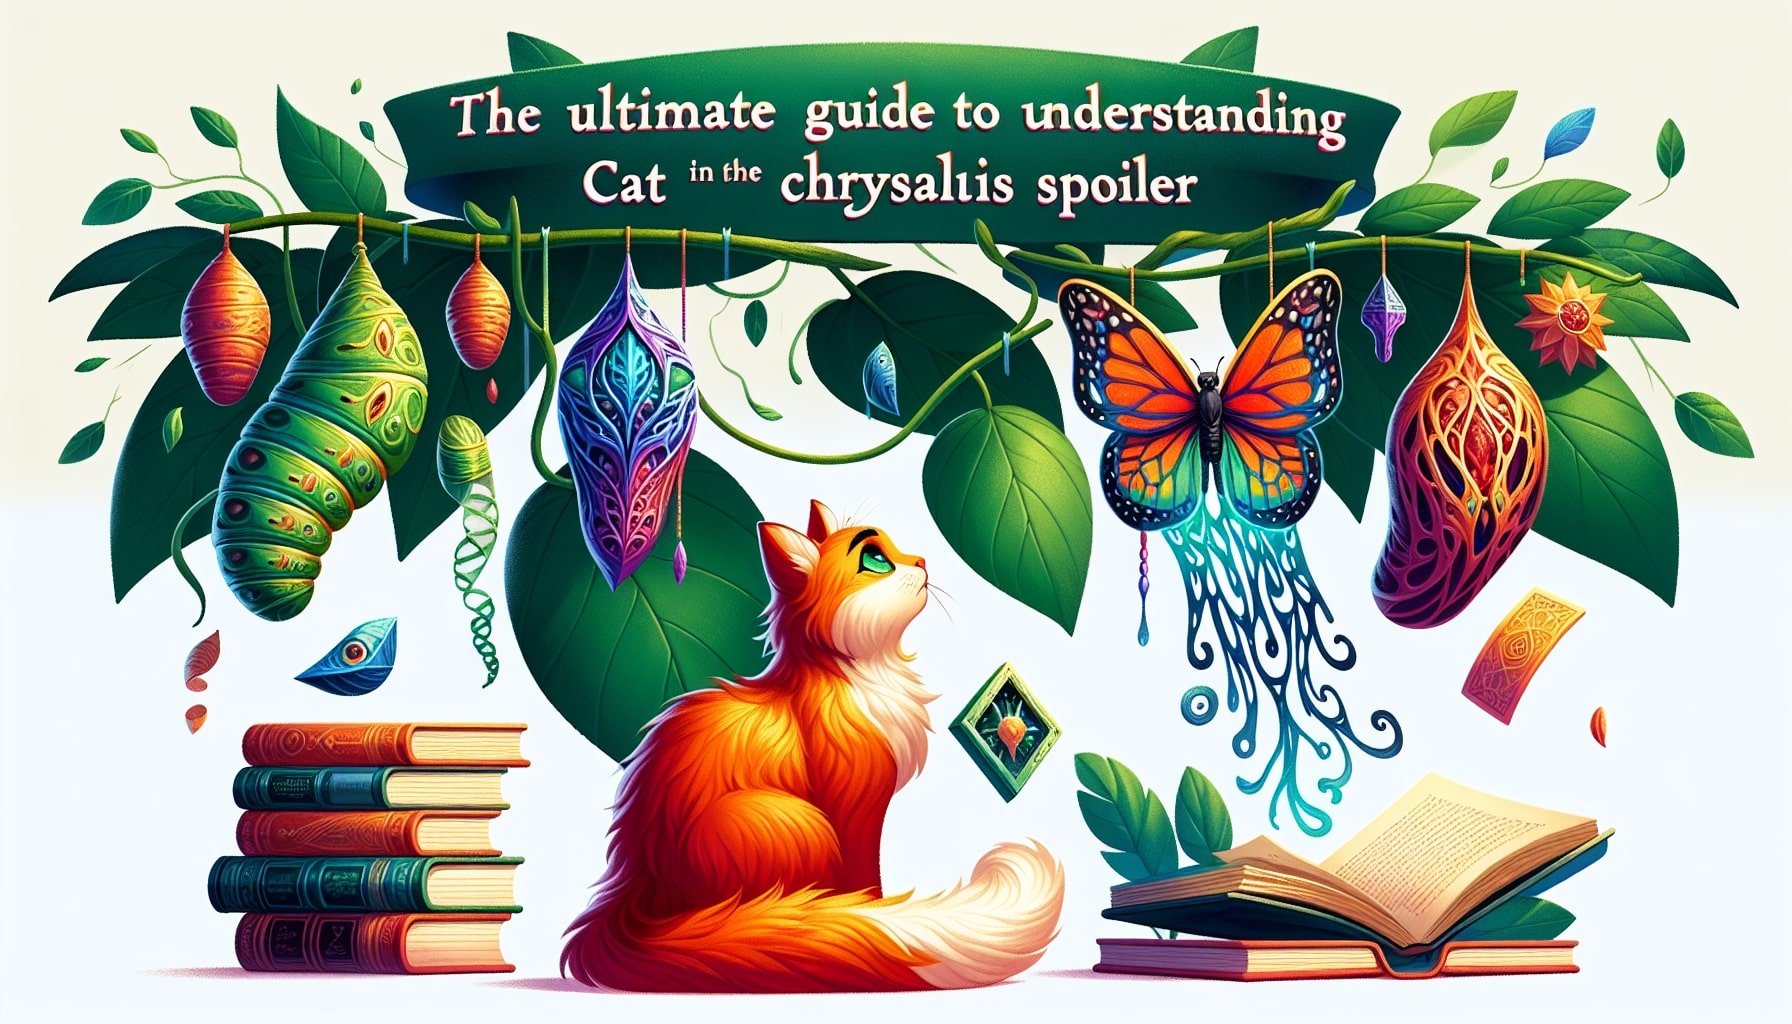 The Ultimate Guide to Understanding Cat in the Chrysalis Spoiler